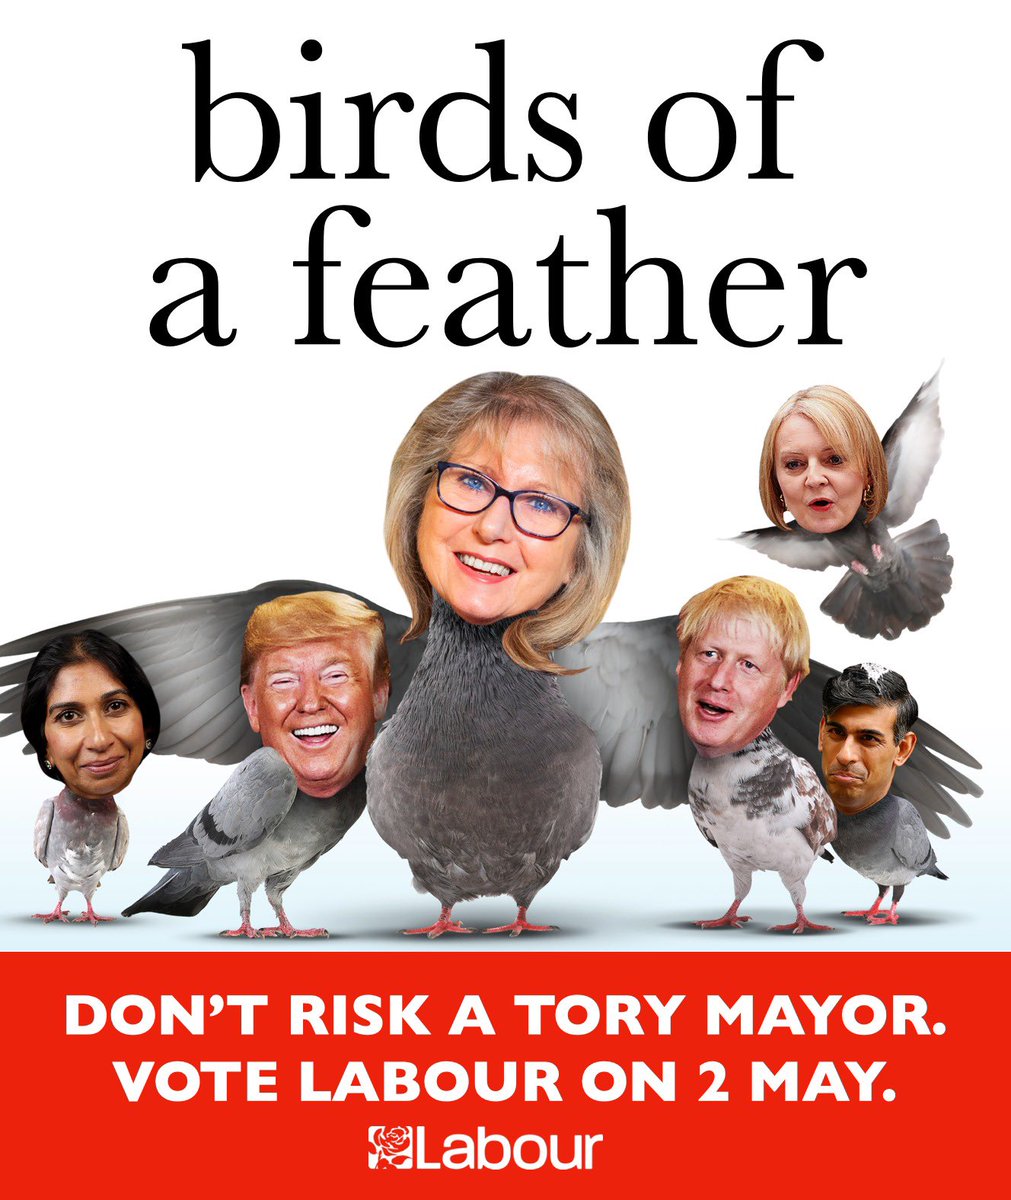 Birds of a feather… If the progressive vote is split we risk a Tory Mayor in City Hall. The Tories changed the electoral system to ‘first past the post’ and introduced voter ID to help their cause. Don’t let them get away with it. #VoteLabour #May2nd 🌹🌹🌹